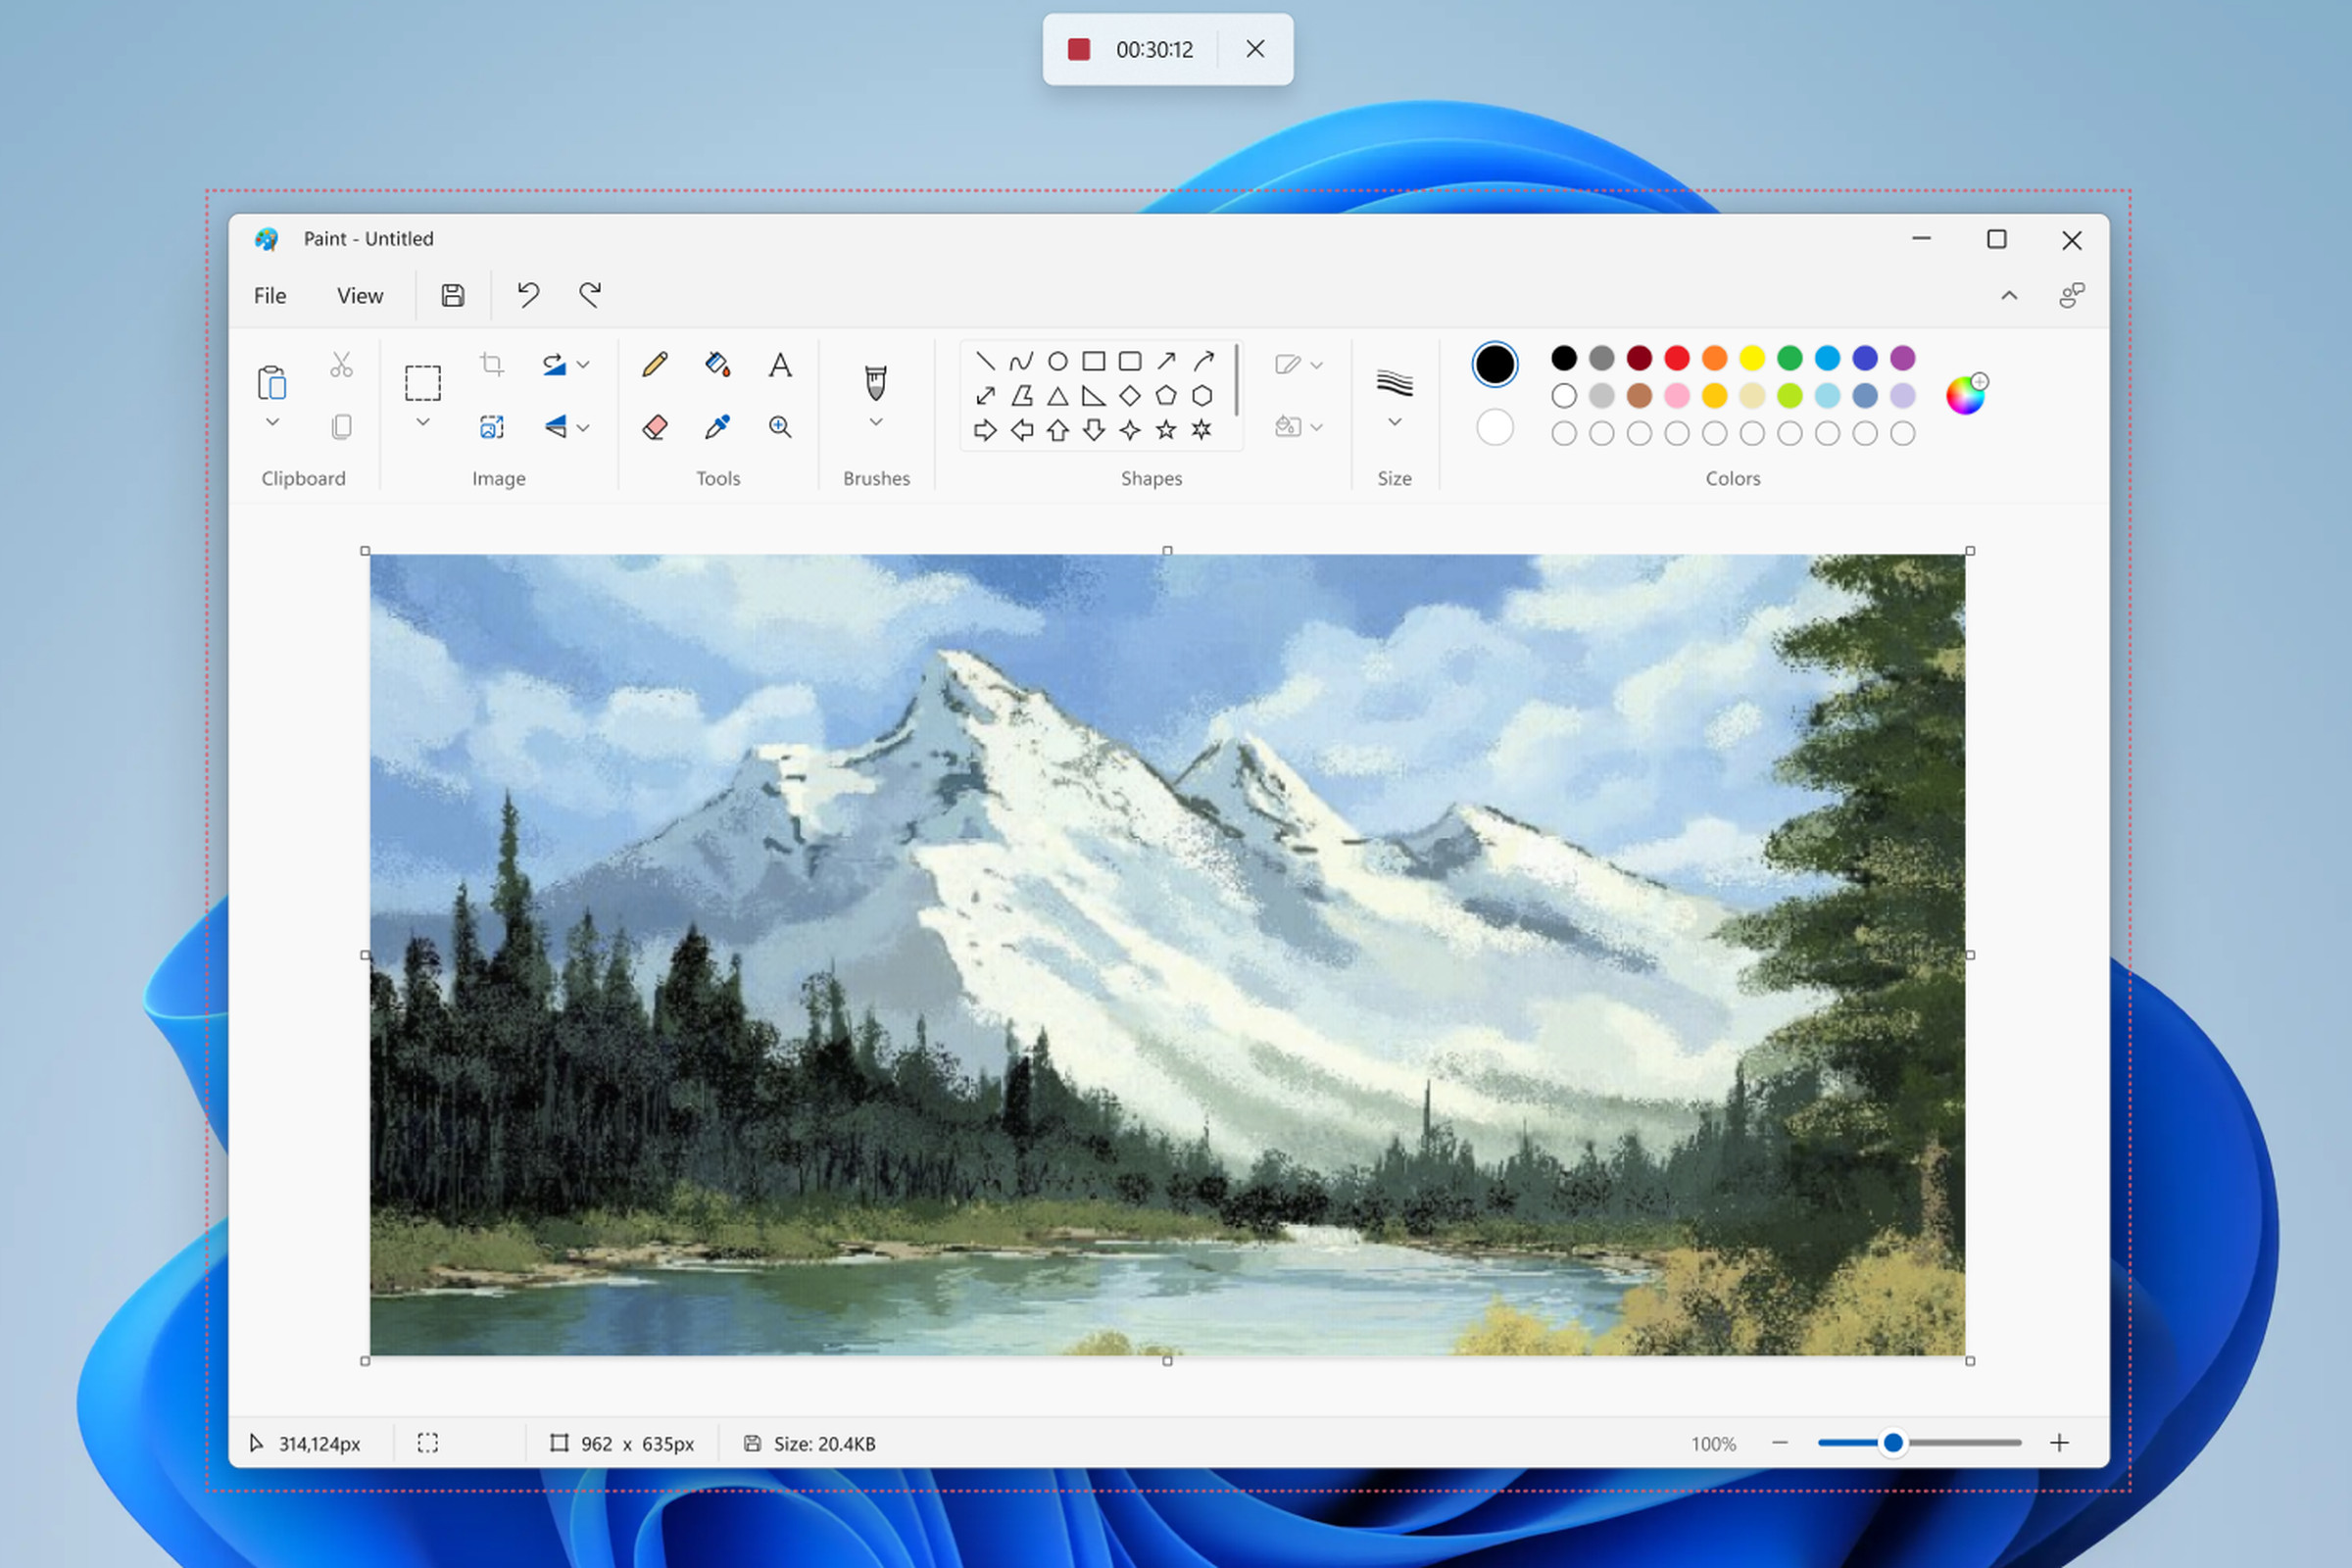 Windows 11’s Snipping Tool can record your entire screen or parts of it